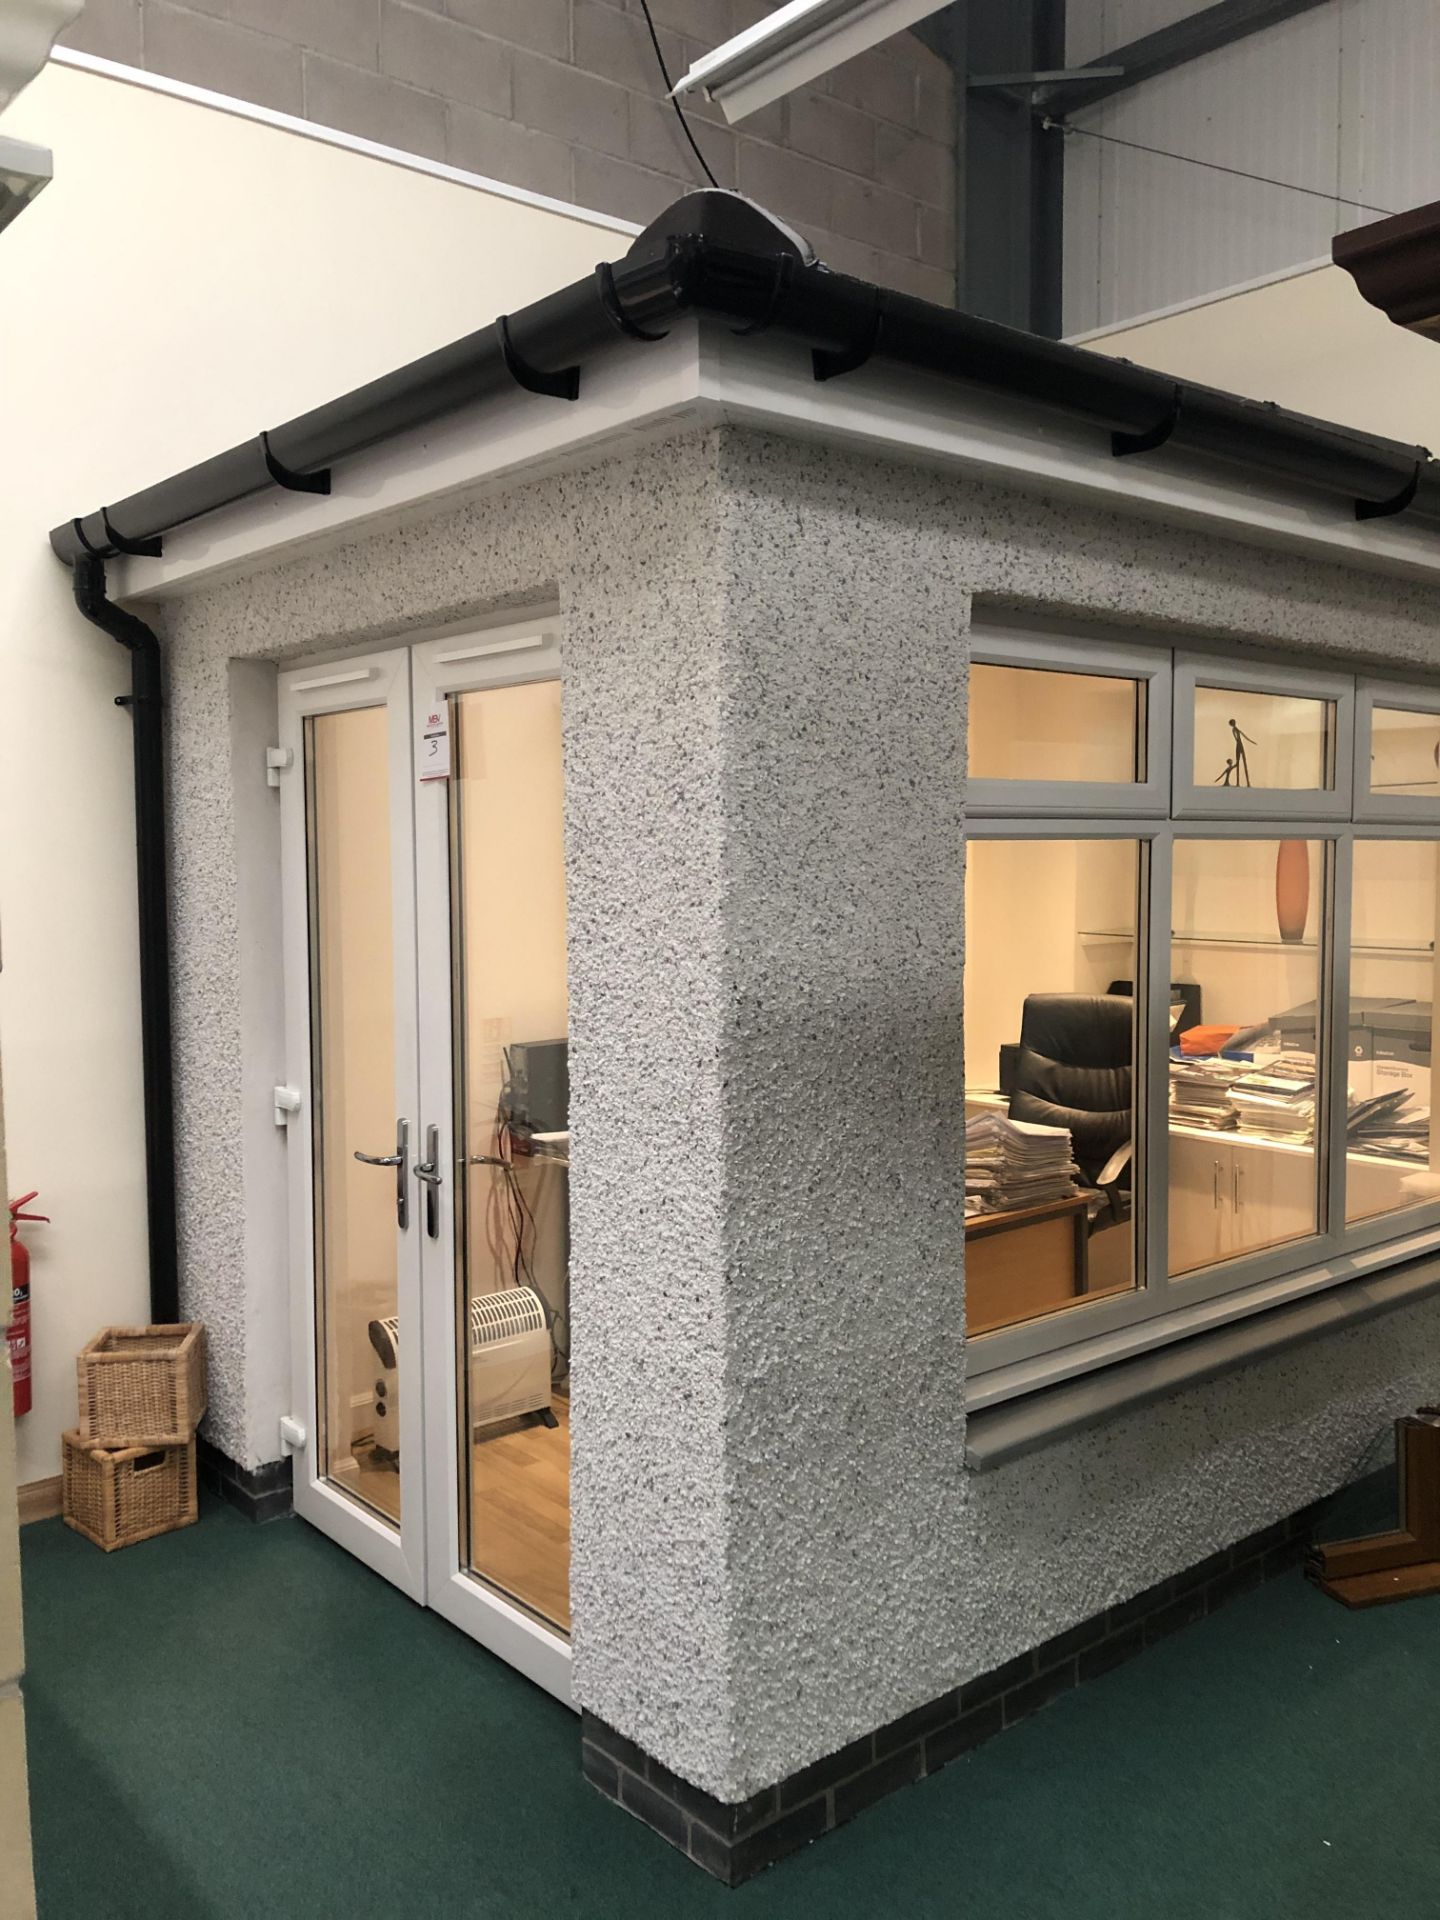 display conservatory with 3 display windows and doors - Image 2 of 2